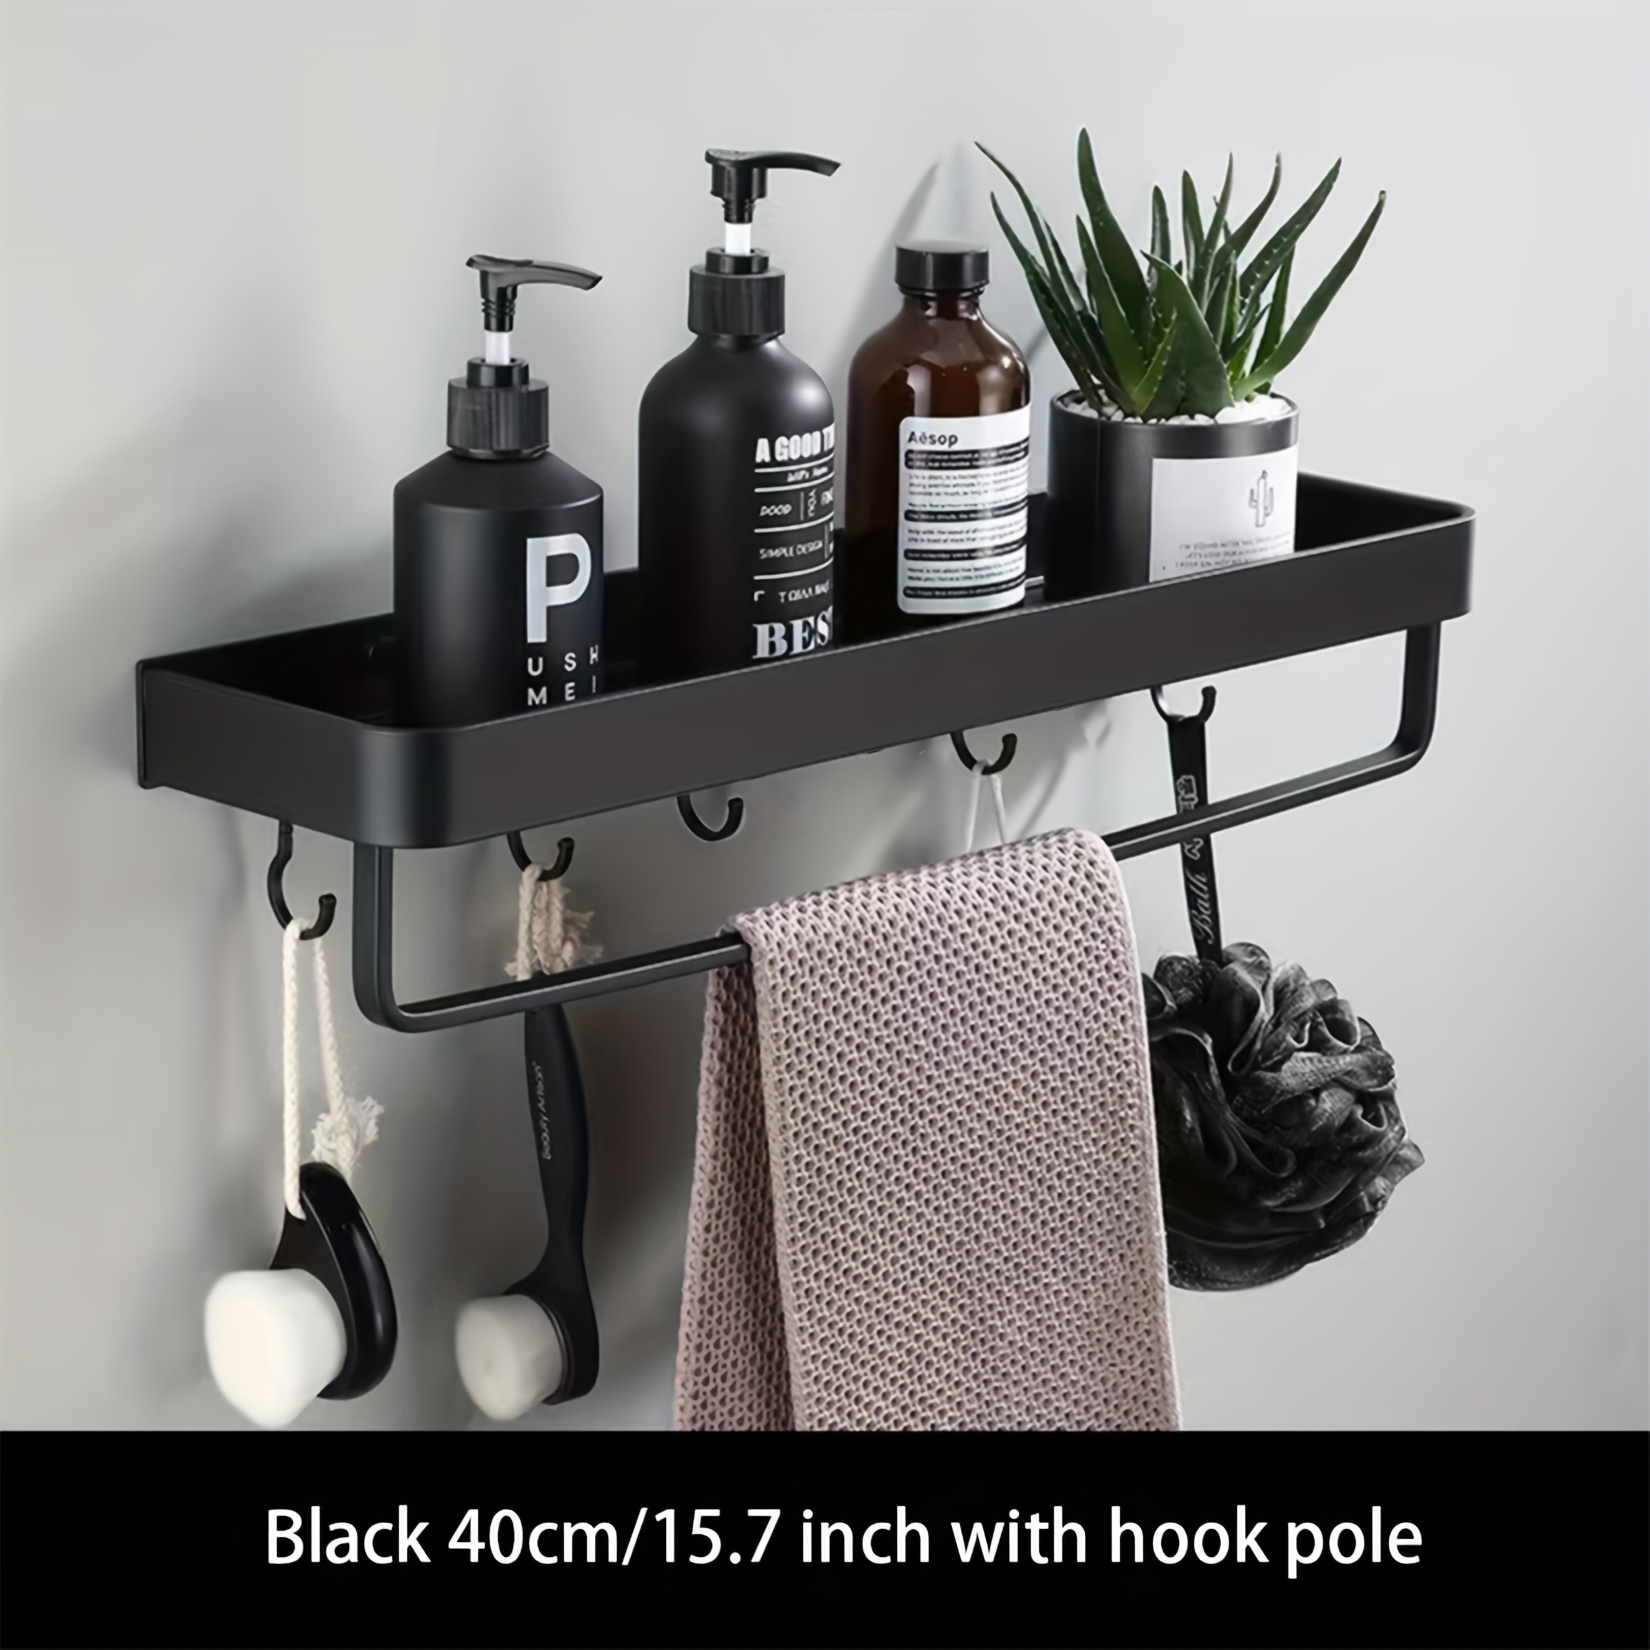 Floating Shelves Punch Free For Wall Storage Self-adhesive Rack Kitchen  Home Decor Bathroom Accessorie Modern